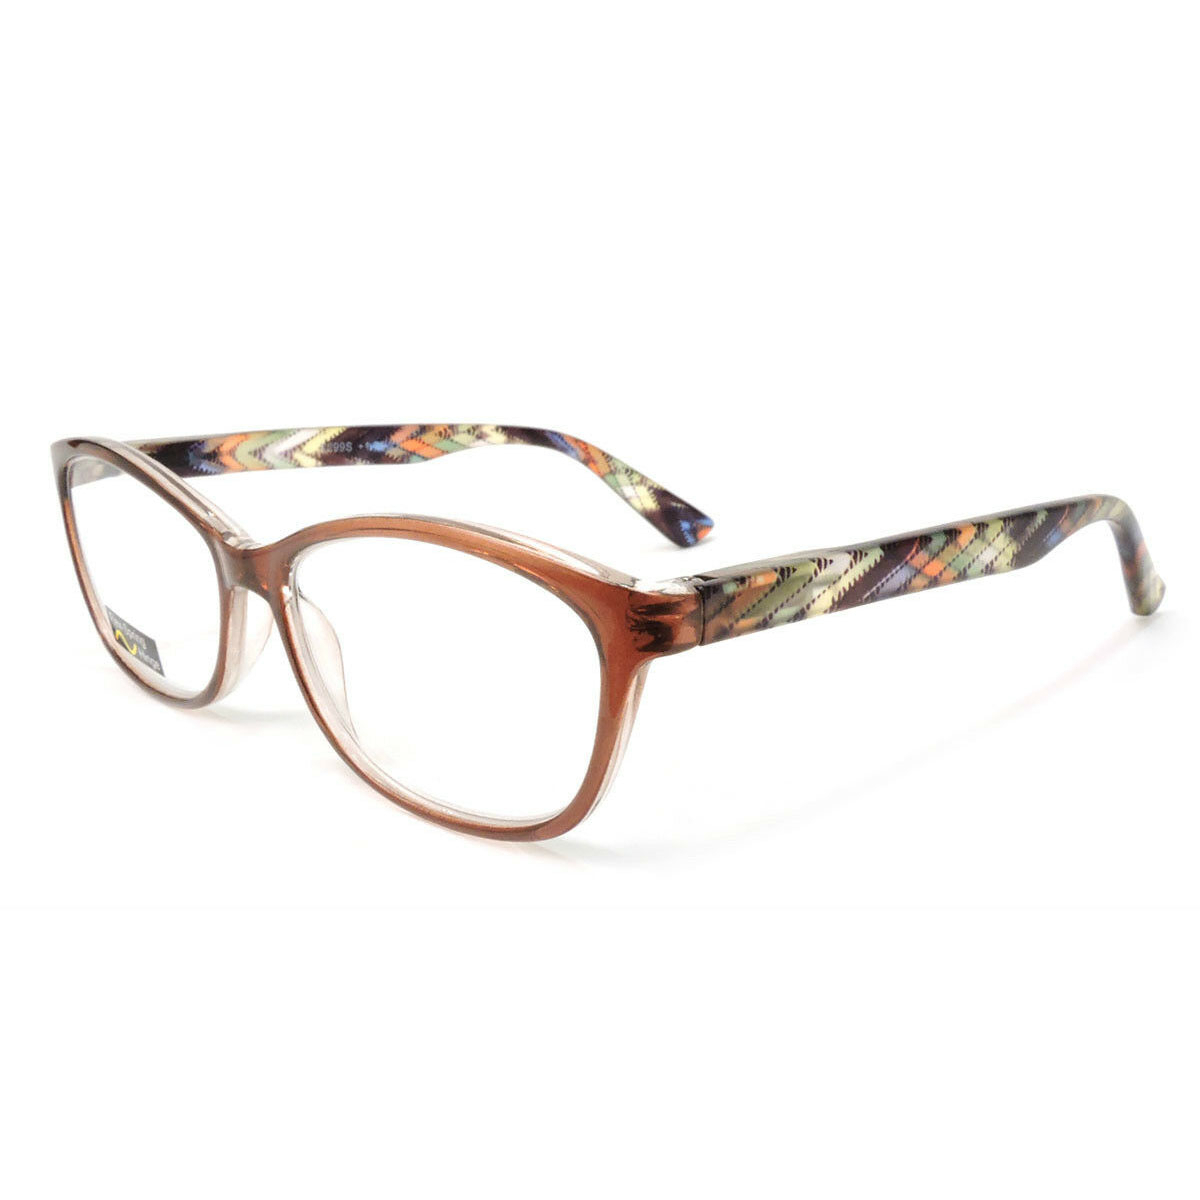 Classic Frame Reading Glasses Colorful Arms Retro Vintage Style - Brown, +2.00